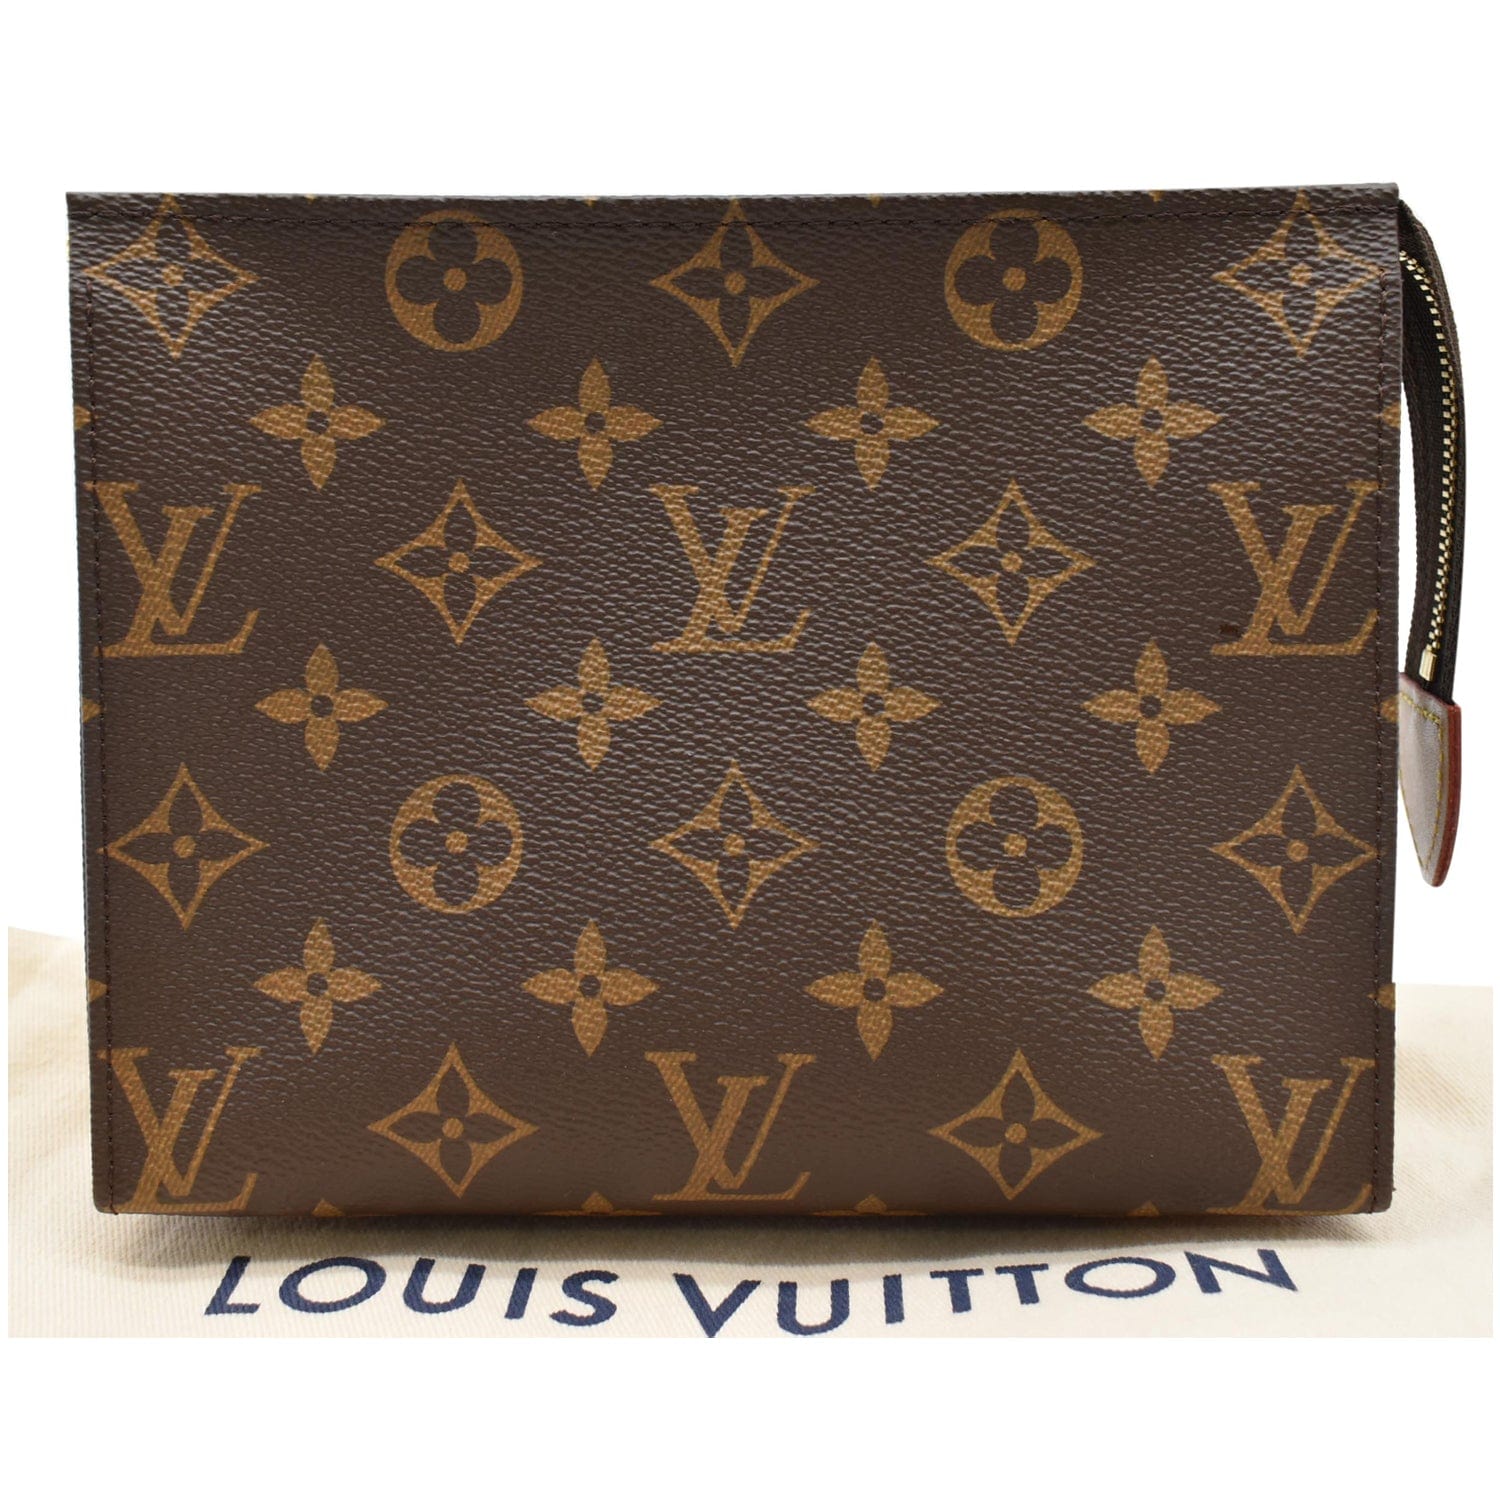 Louis Vuitton Fondation Off-White/Brown Canvas Tote Bag & Makeup Pouch  with Box